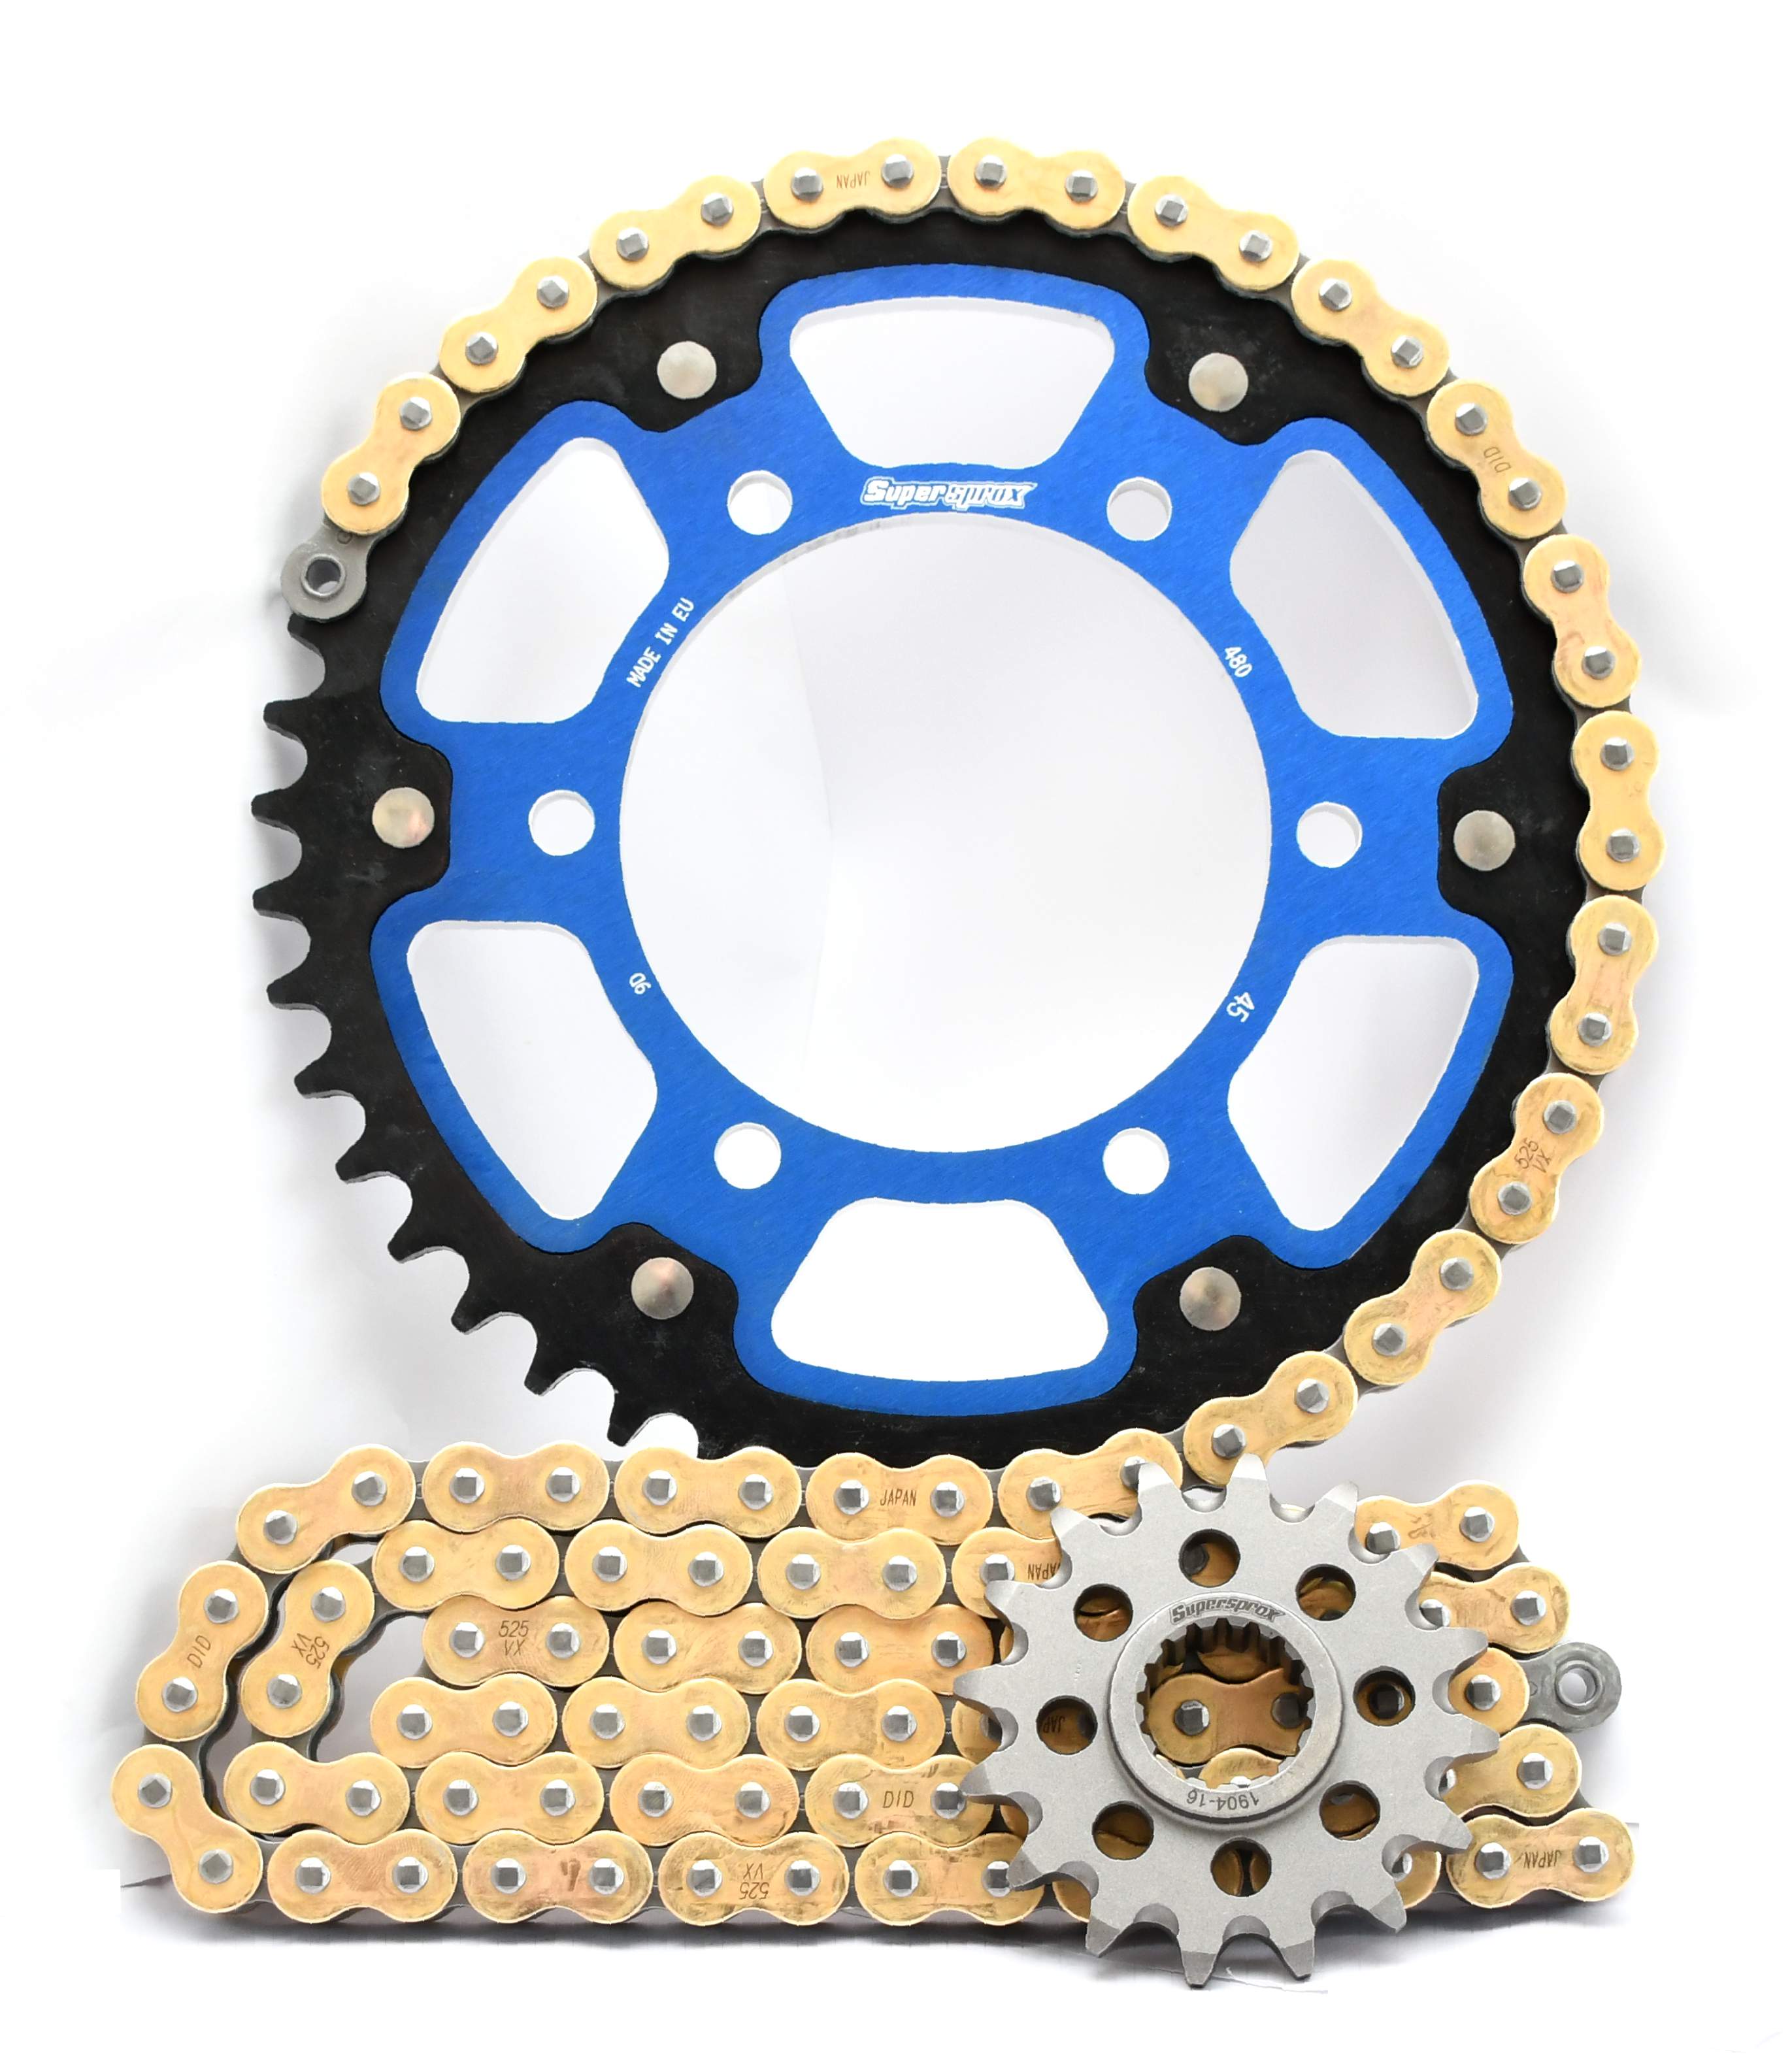 Supersprox Chain & Sprocket Kit for Yamaha MT-09 and XSR 900 - Standard Gearing